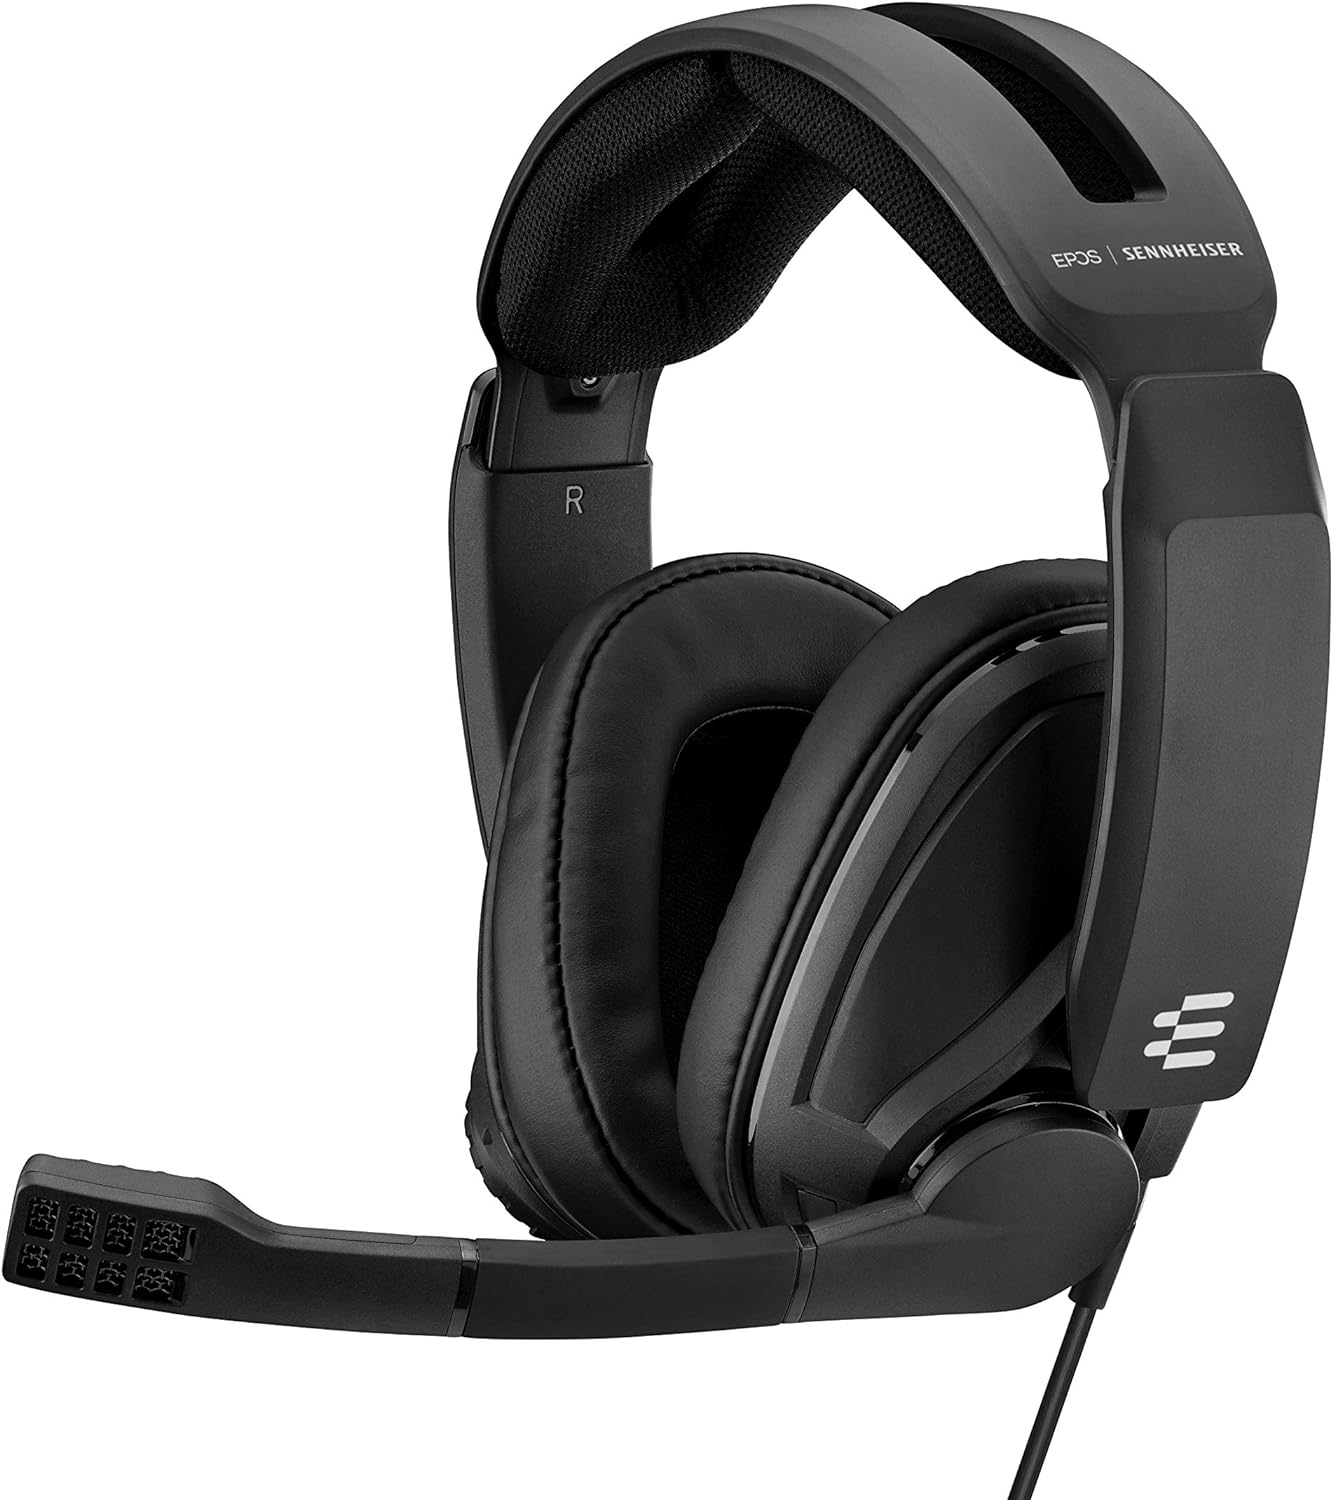 EPOS Sennheiser GSP 302 Gaming Headset with Noise-Cancelling for PC, Xbox, &amp; PS4